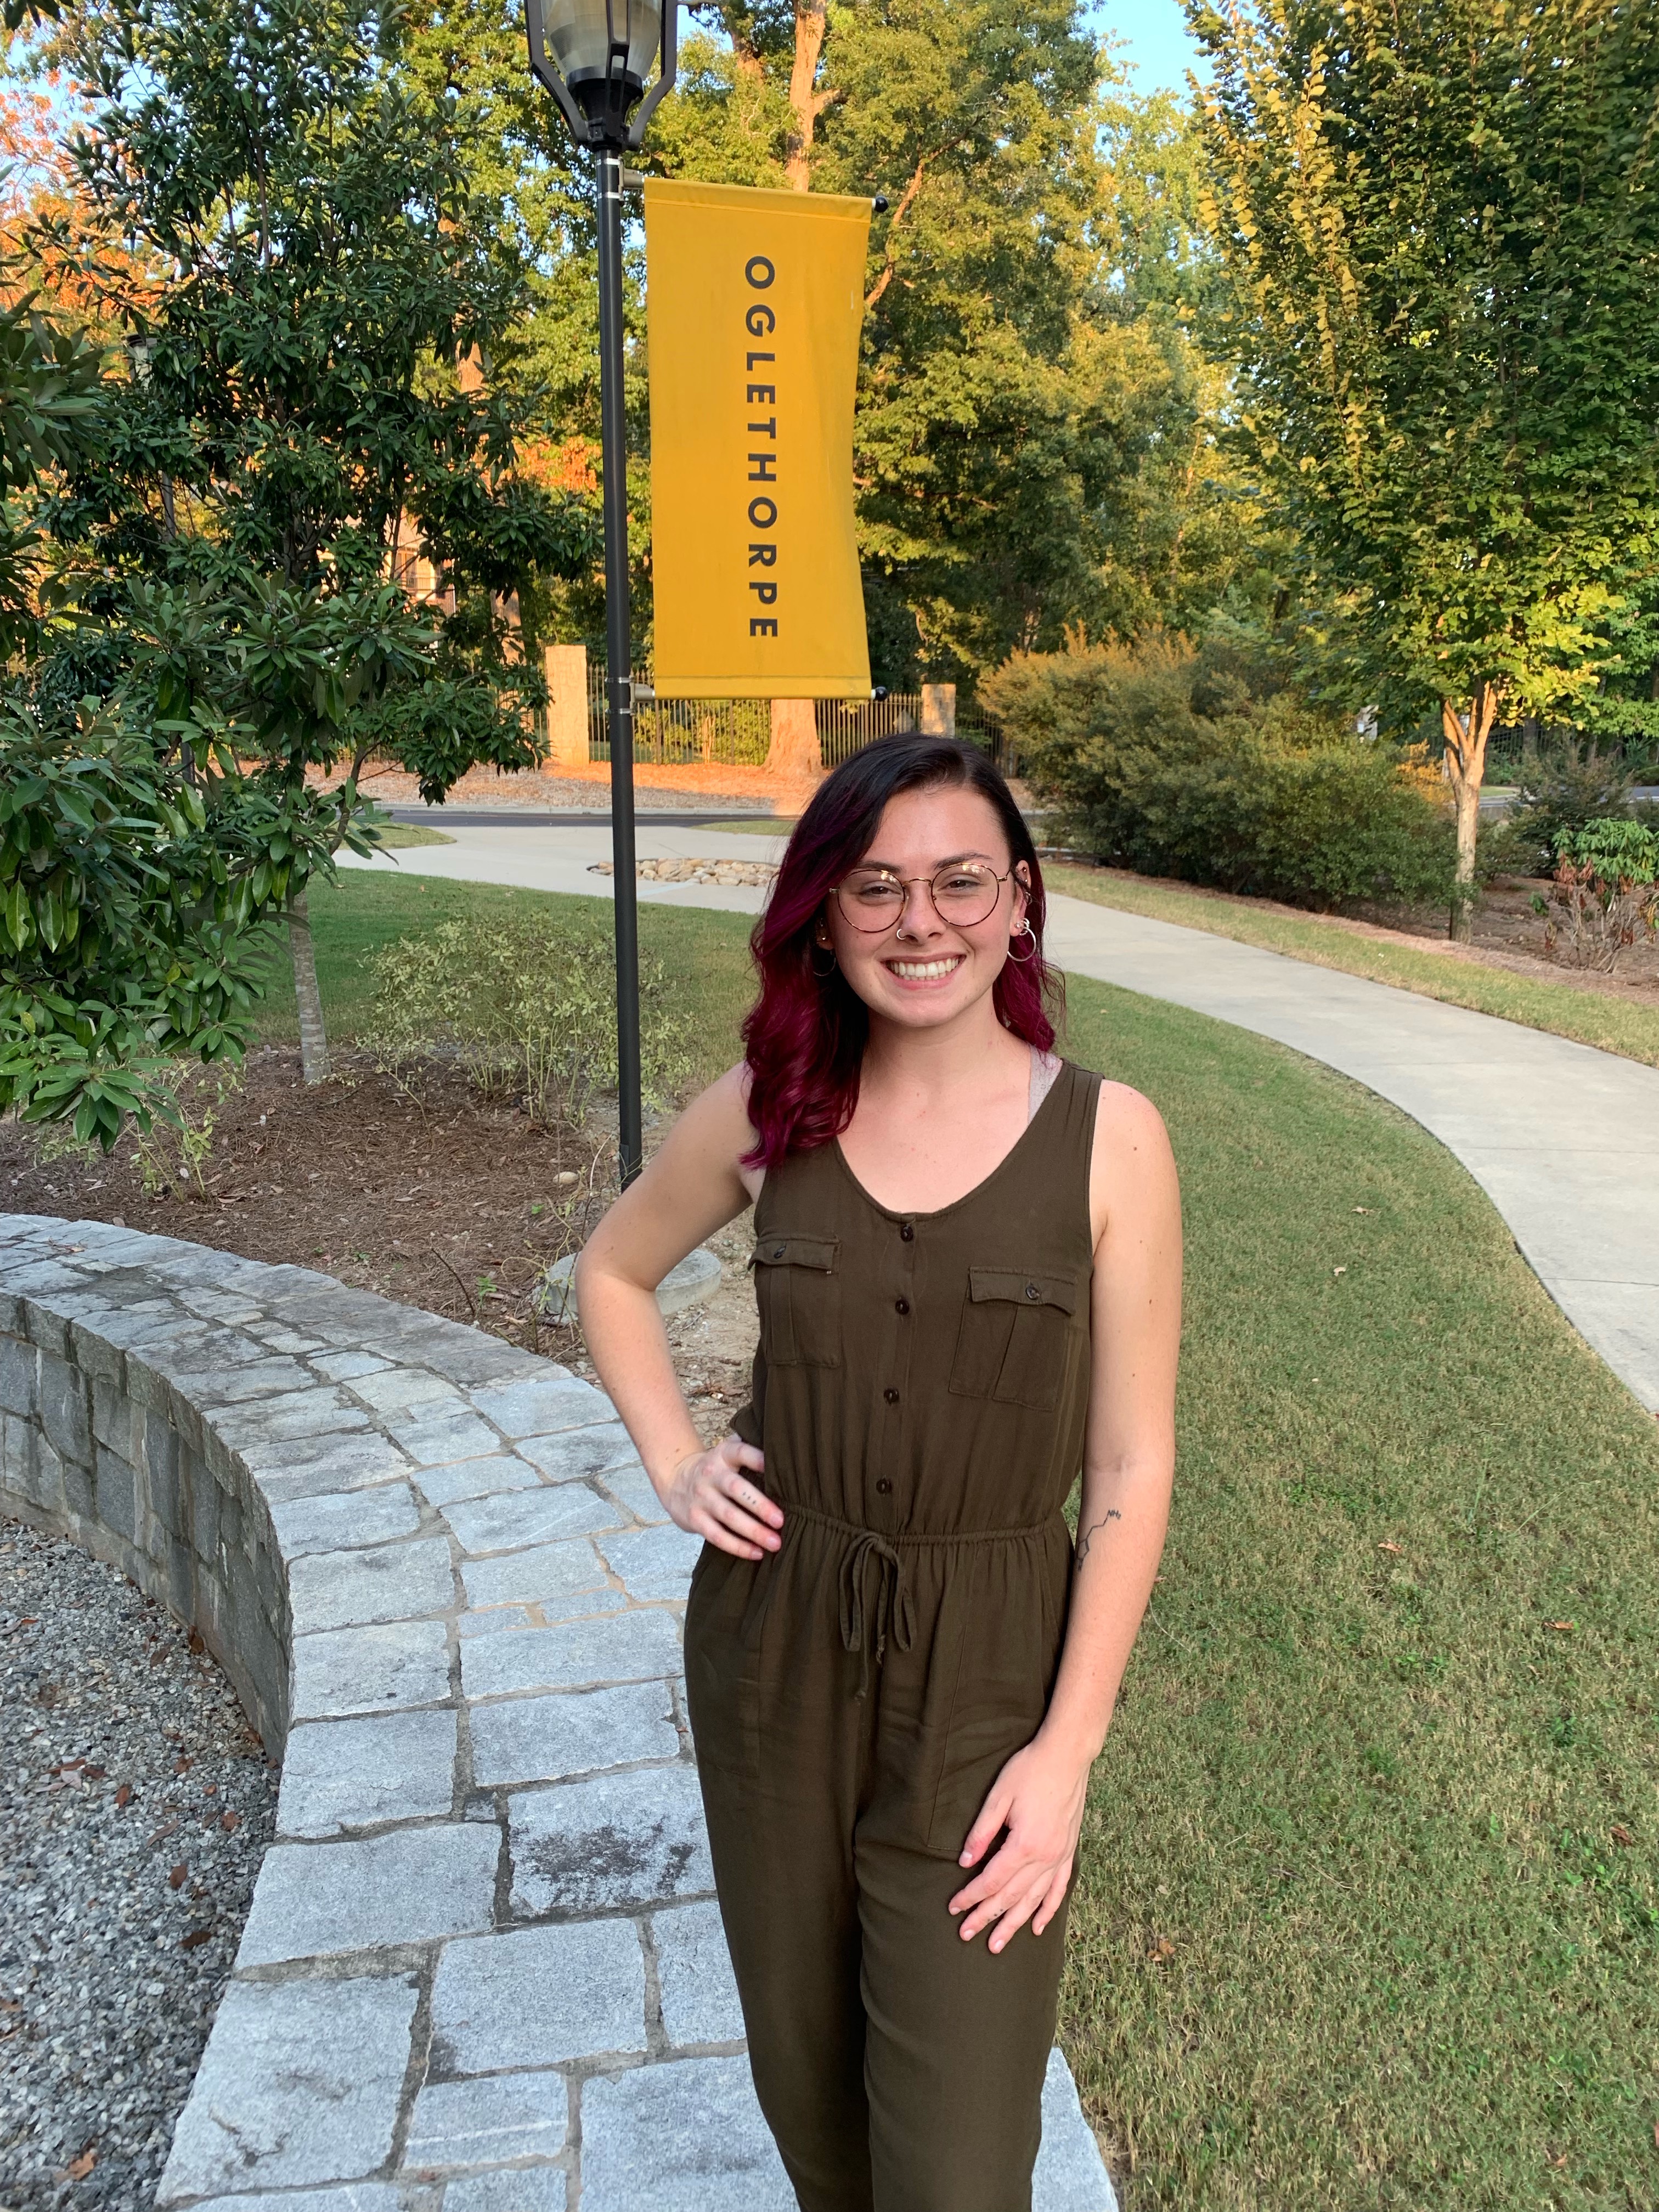 Mikayla Adams standing in front of the sidewalk and Oglethorpe flag